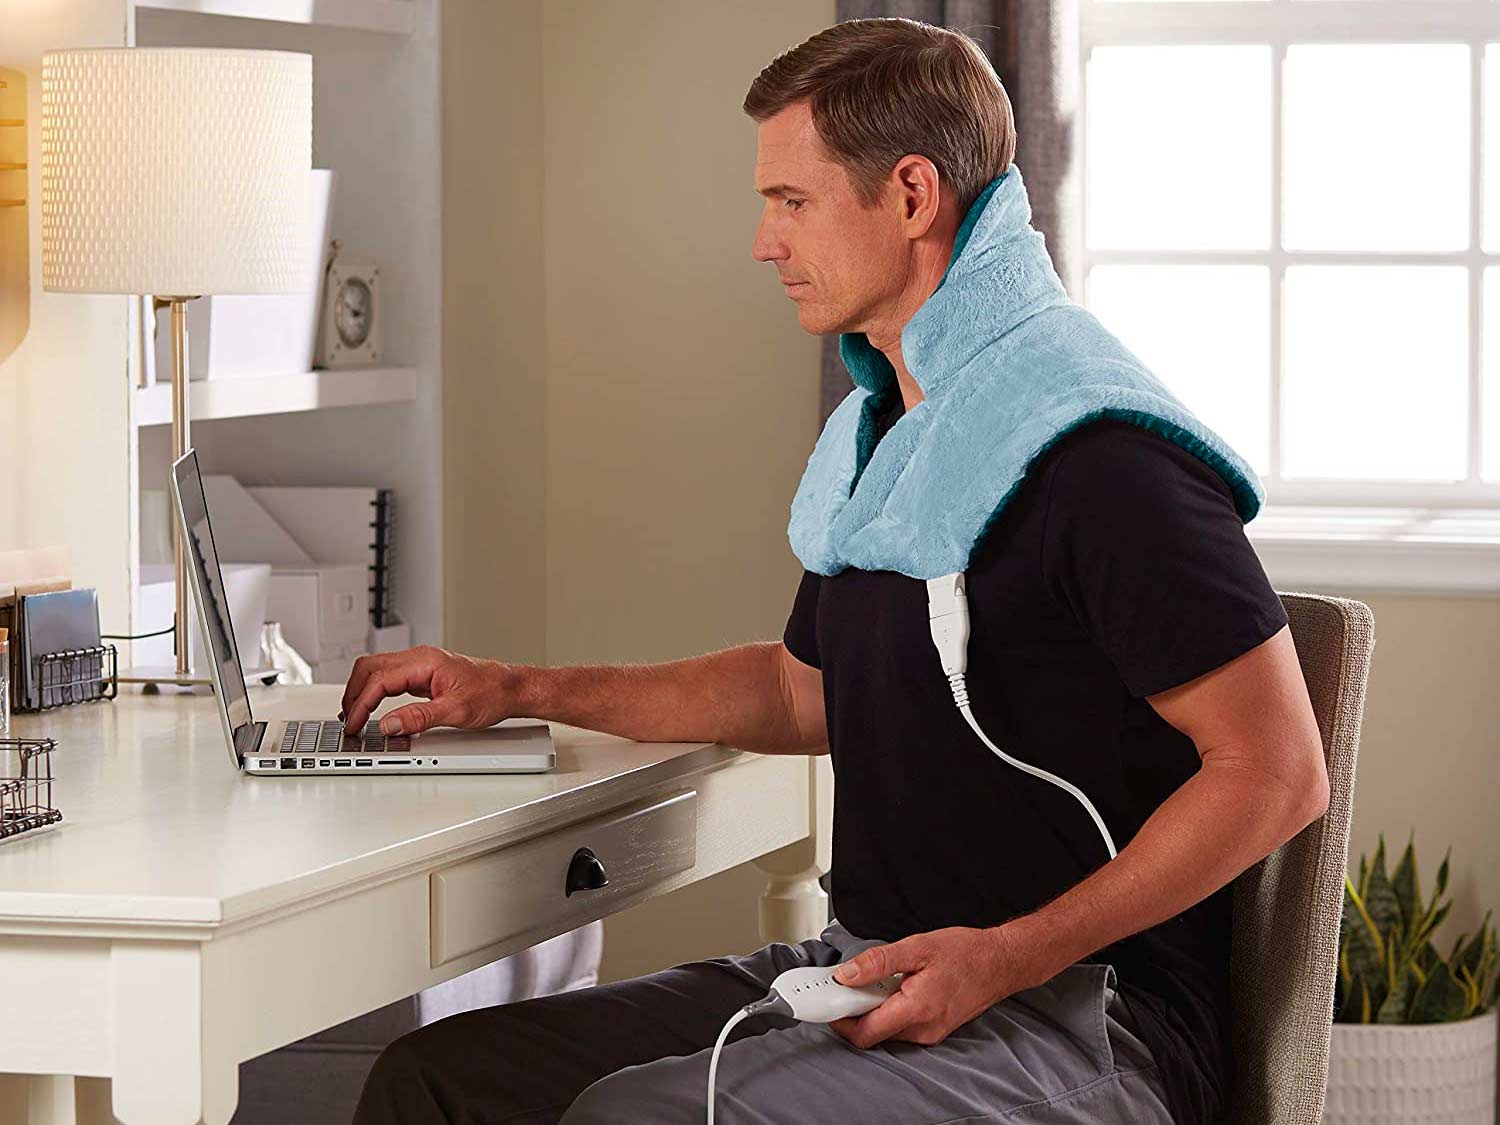 Neck heating pads to help you work or relax in comfort